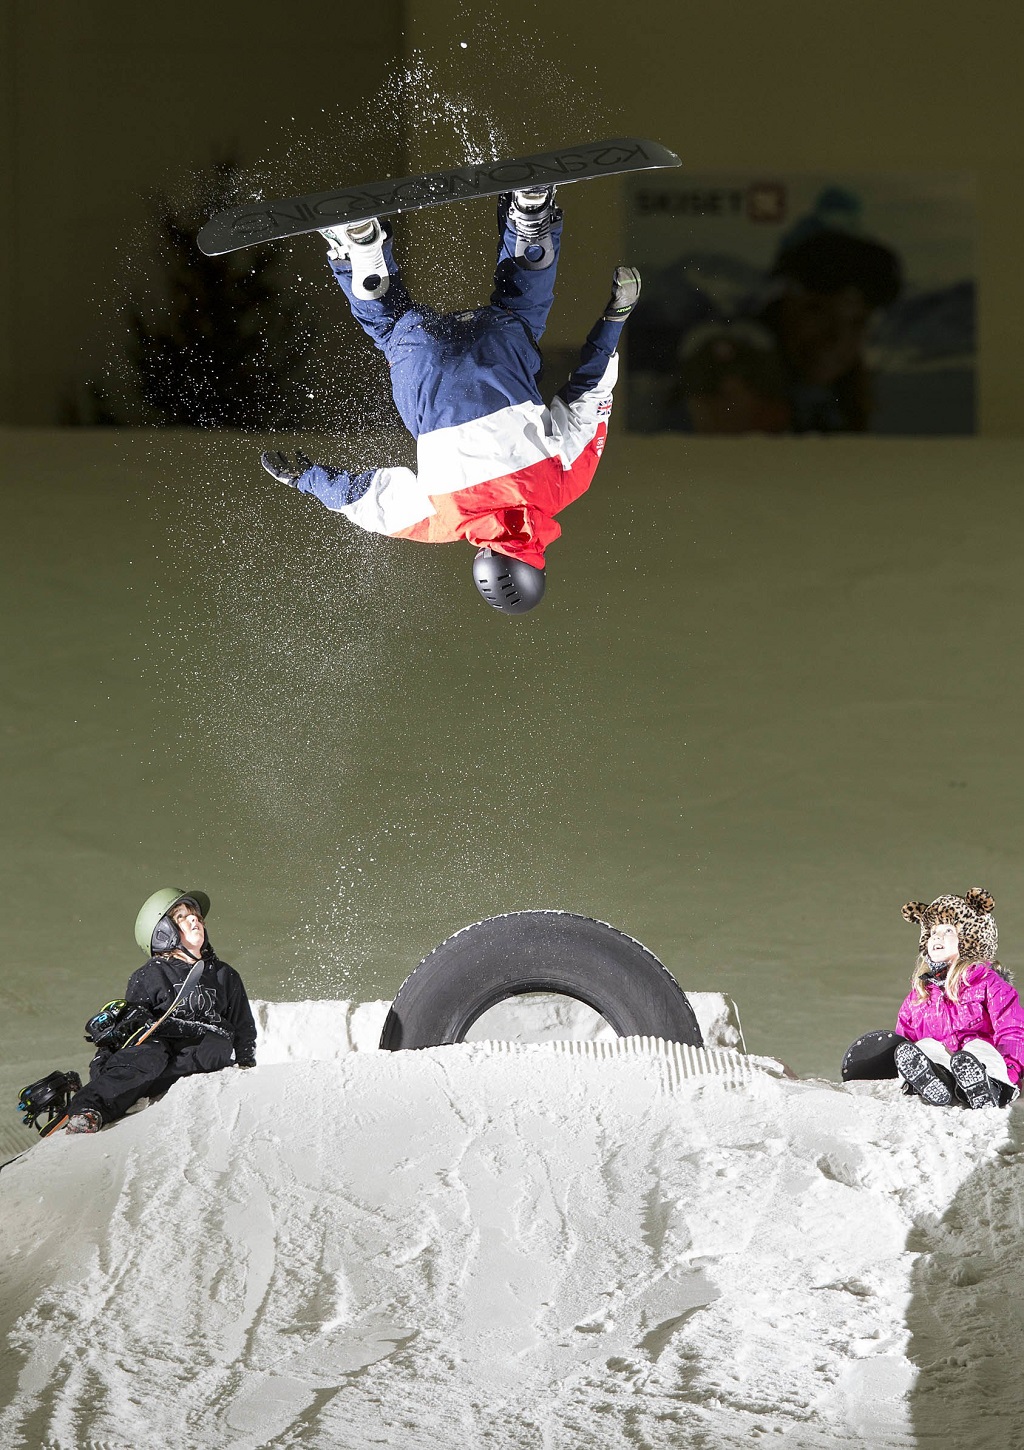 Kids enjoy the snow as former World Cup snowboarder Ben Kilner somersaults at Snow Factor (Photo: Jeff Holmes)